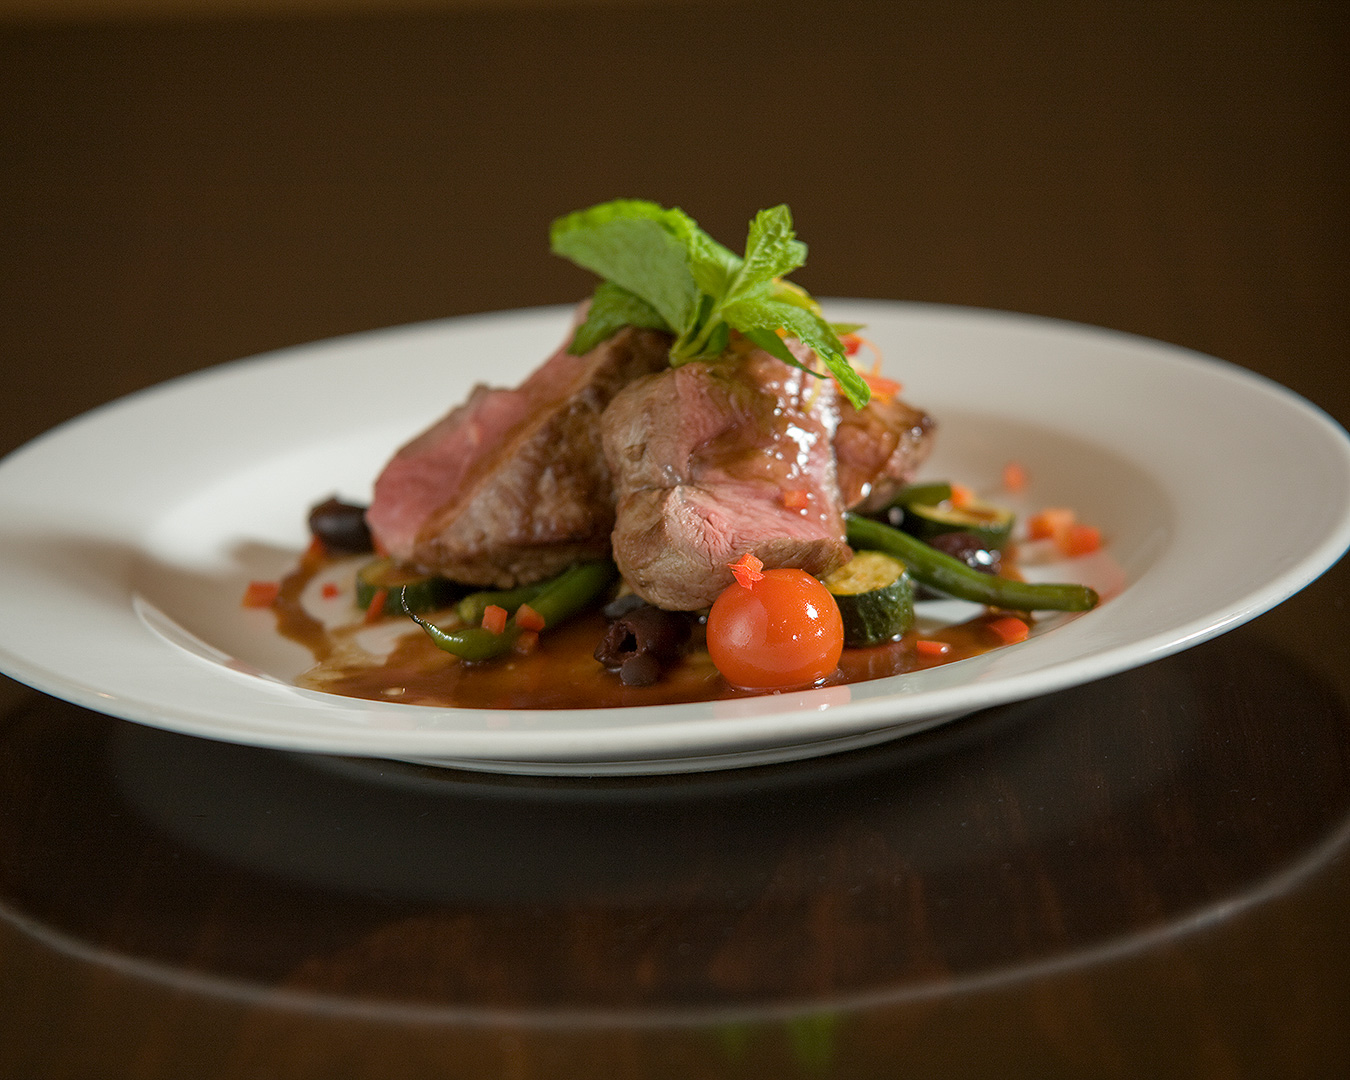 A delicious meat dish nicely plated at Bacchus.